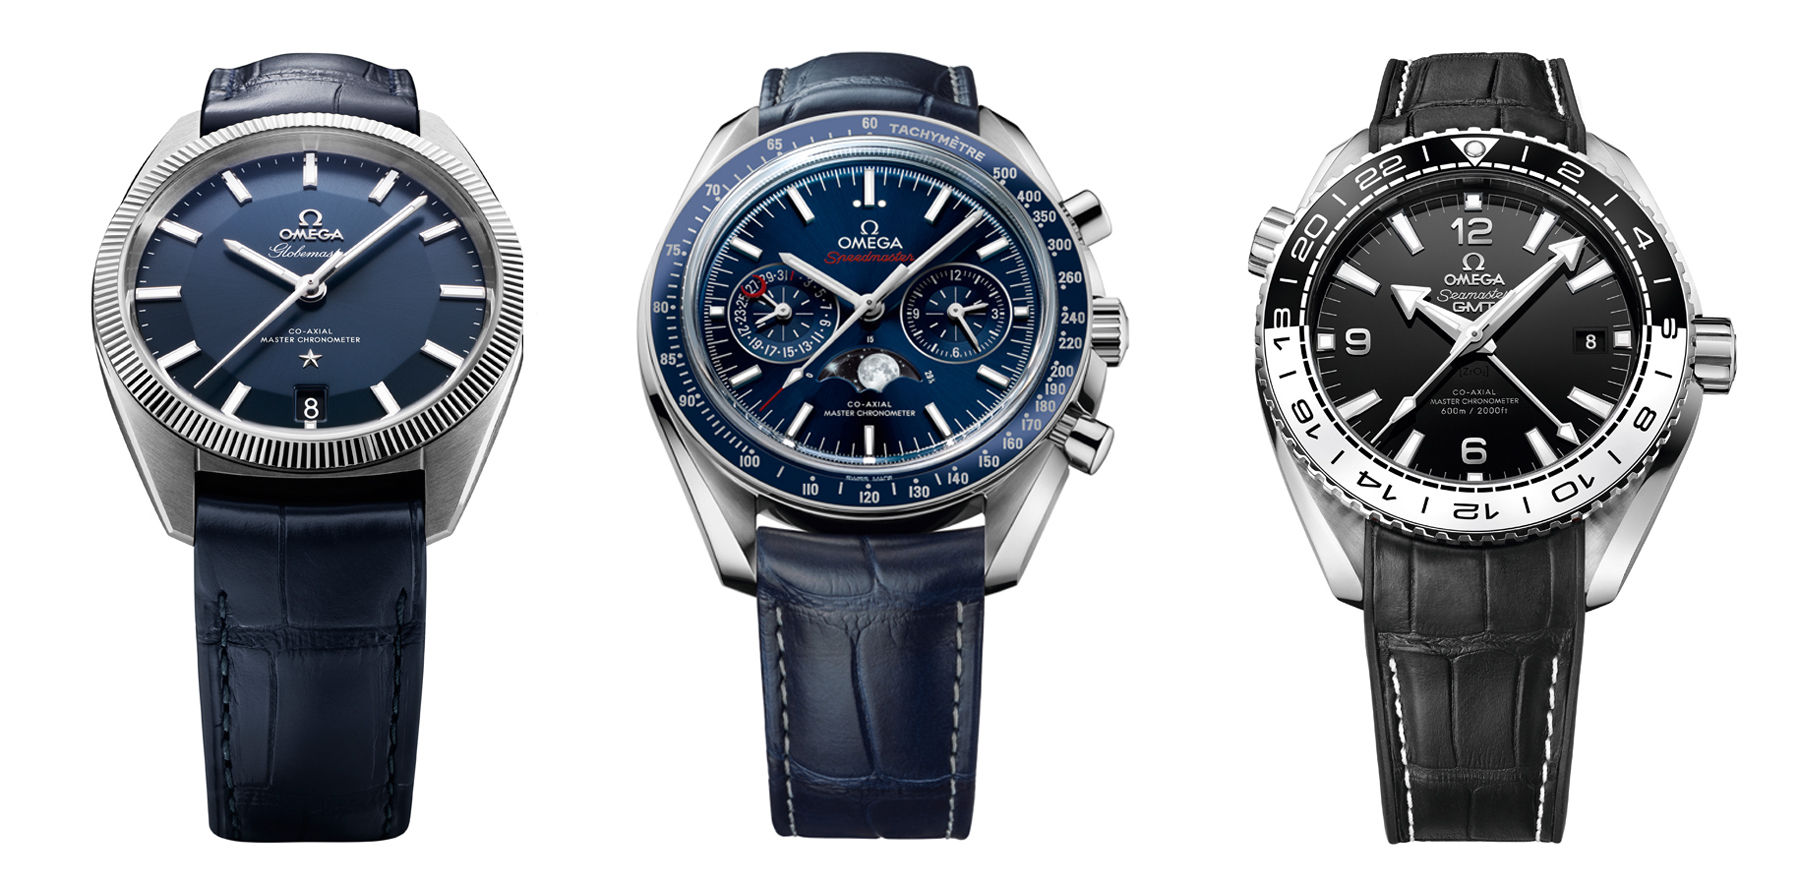 Some of the watches currently accredited as Omega Master Chronometers.